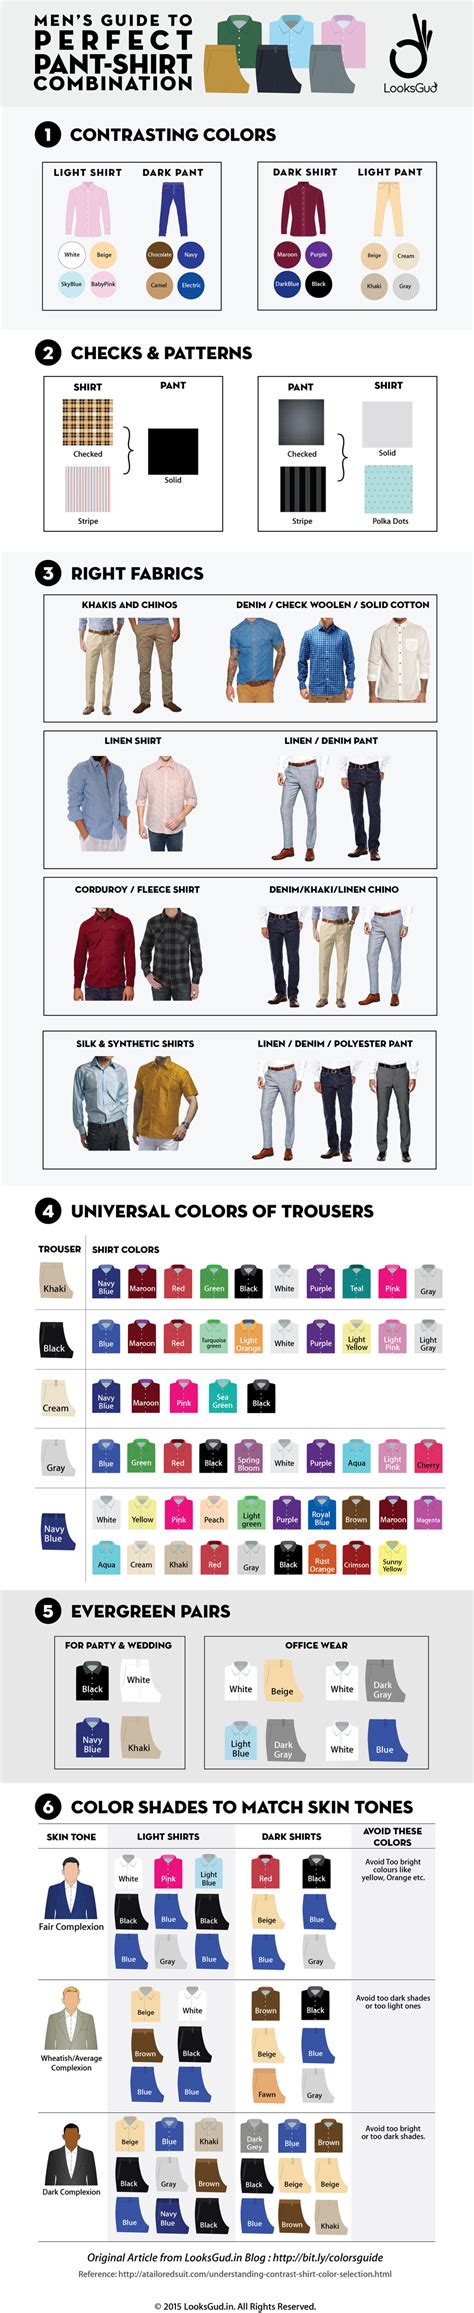 Perfect Pant Shirt Matching Guide For Mens Formal And Casual Look